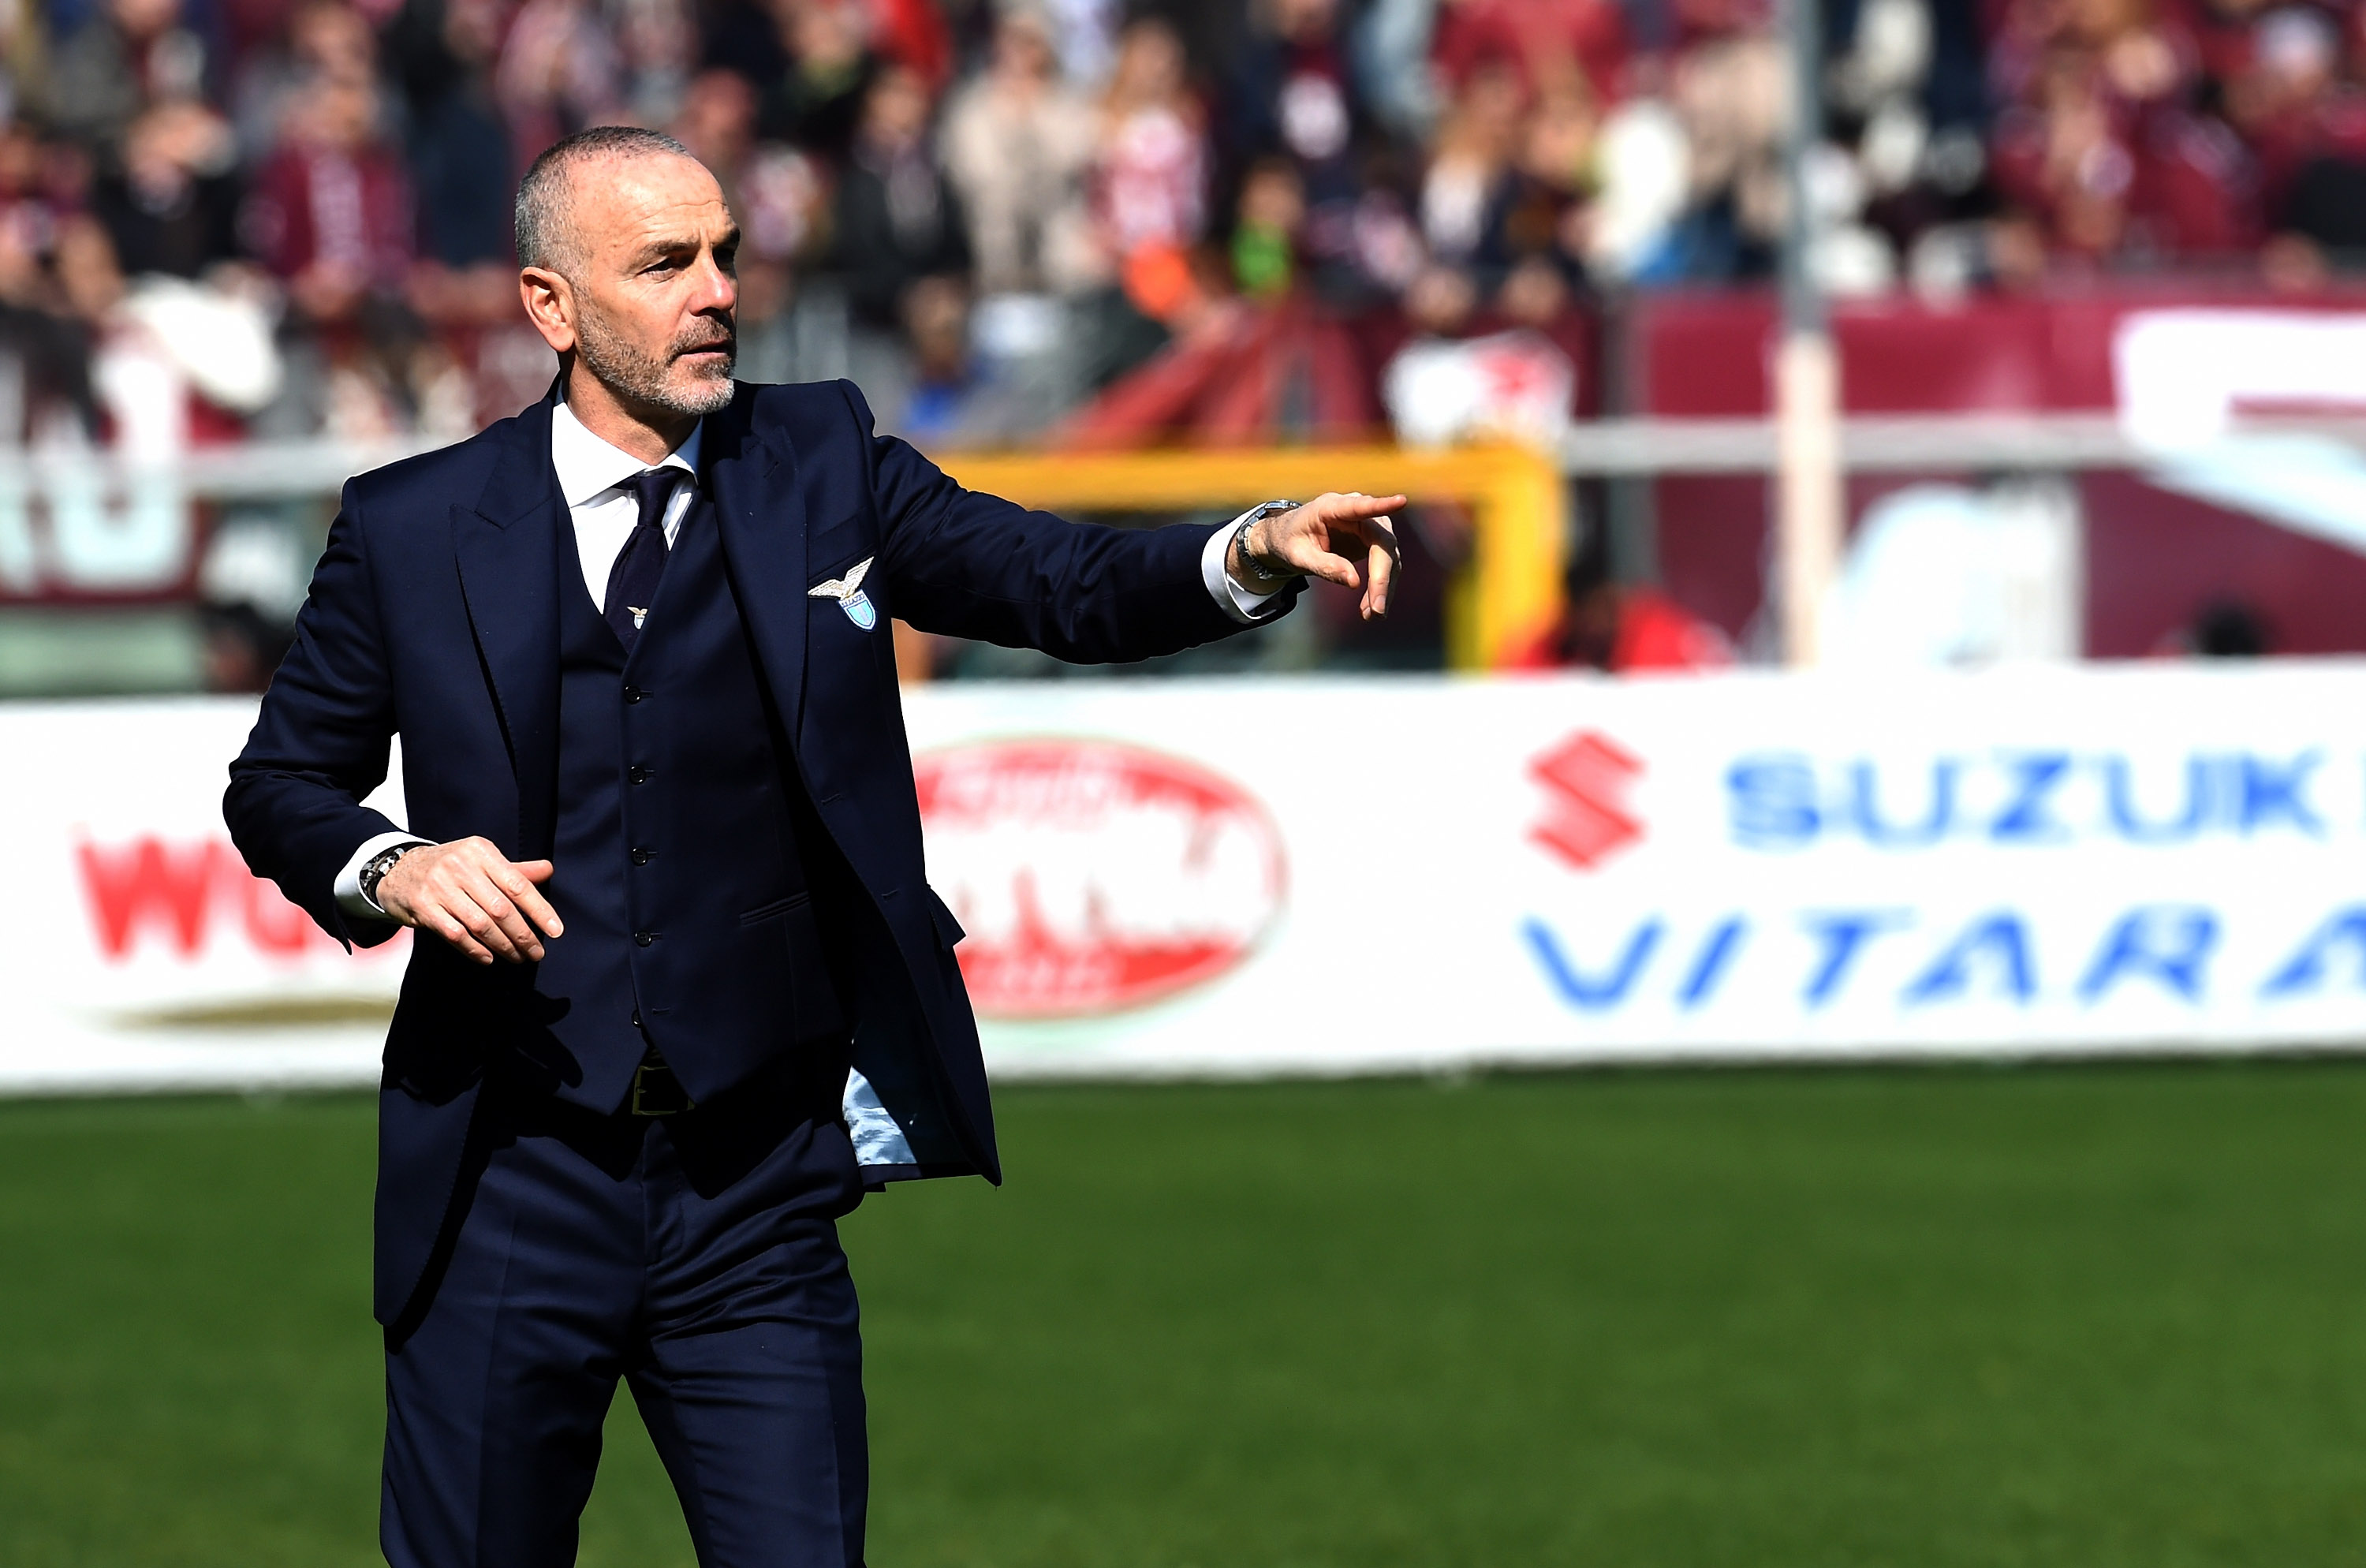 Pioli to Rai: “We all have room for improvement but must grow quickly”